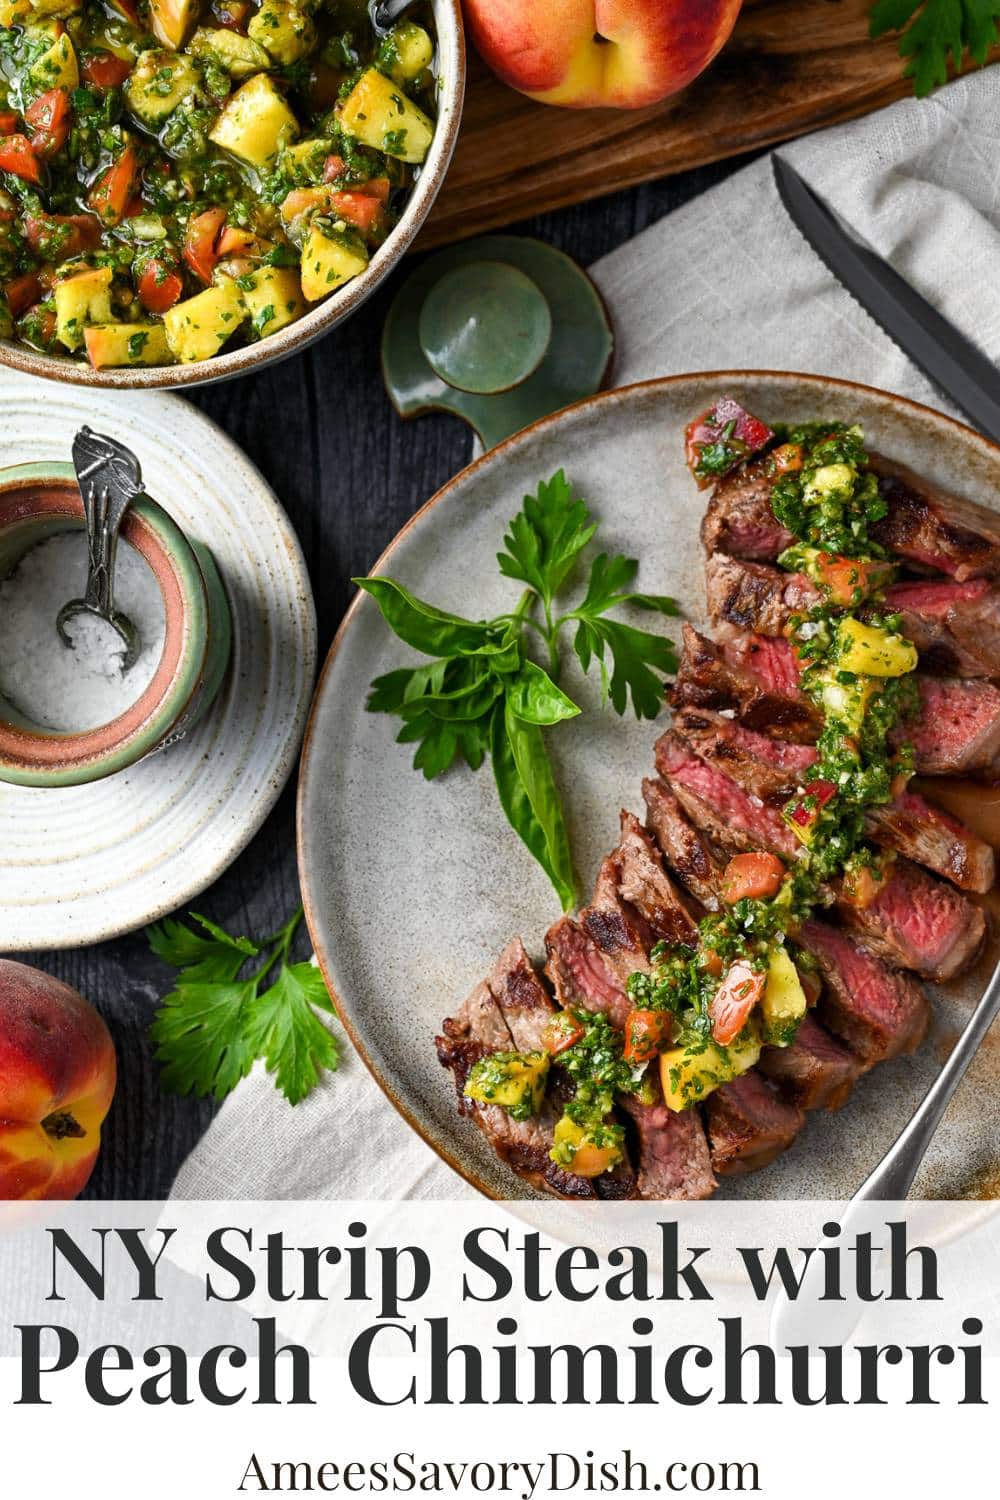 #Sponsored A recipe for grilled New York Strip Steak topped with a flavorful chimichurri sauce made with fresh herbs, grilled peaches, and heirloom tomatoes.  This might just be the best steak dinner that I've ever eaten!  via @Ameessavorydish